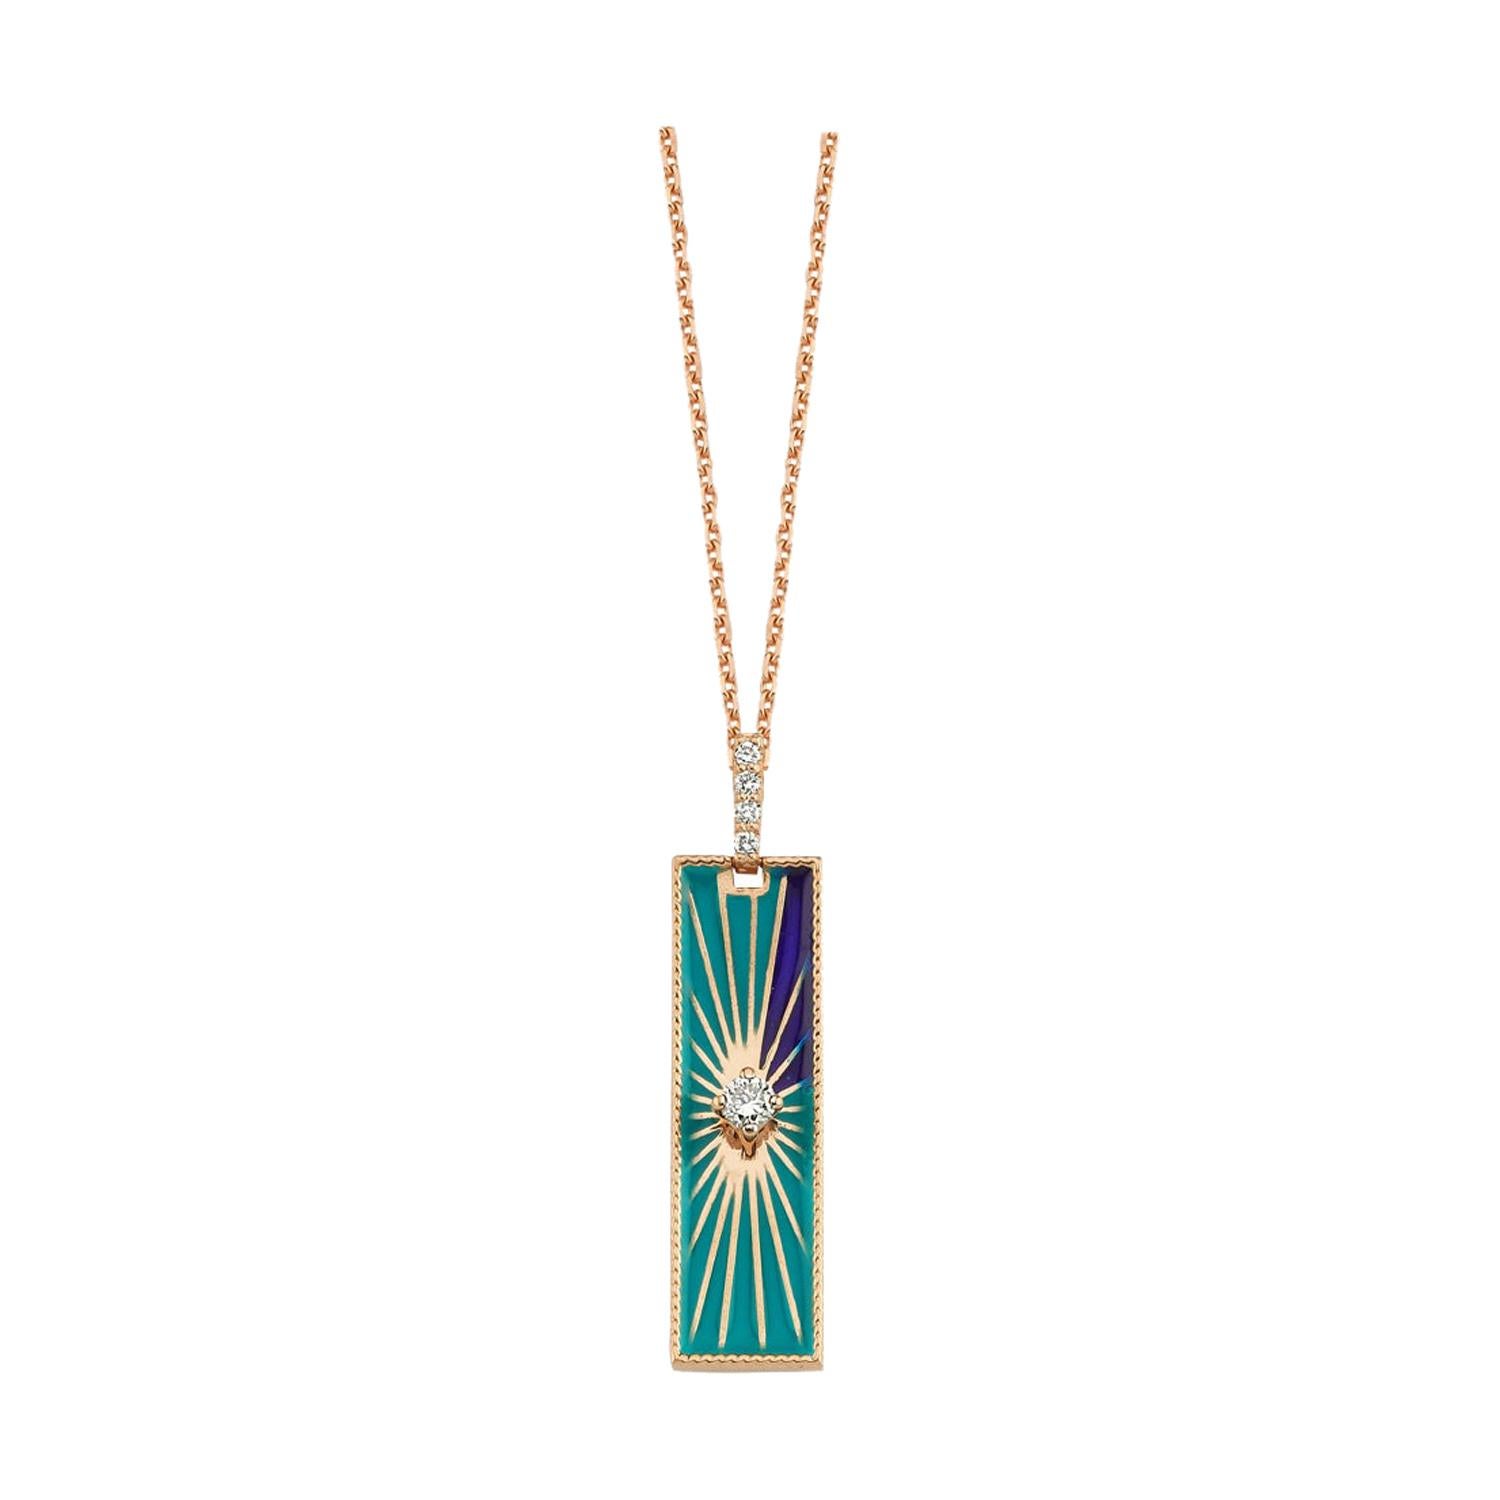 Apolline Necklace-Turquoise Enamel in 14 Karat Rose Gold For Sale